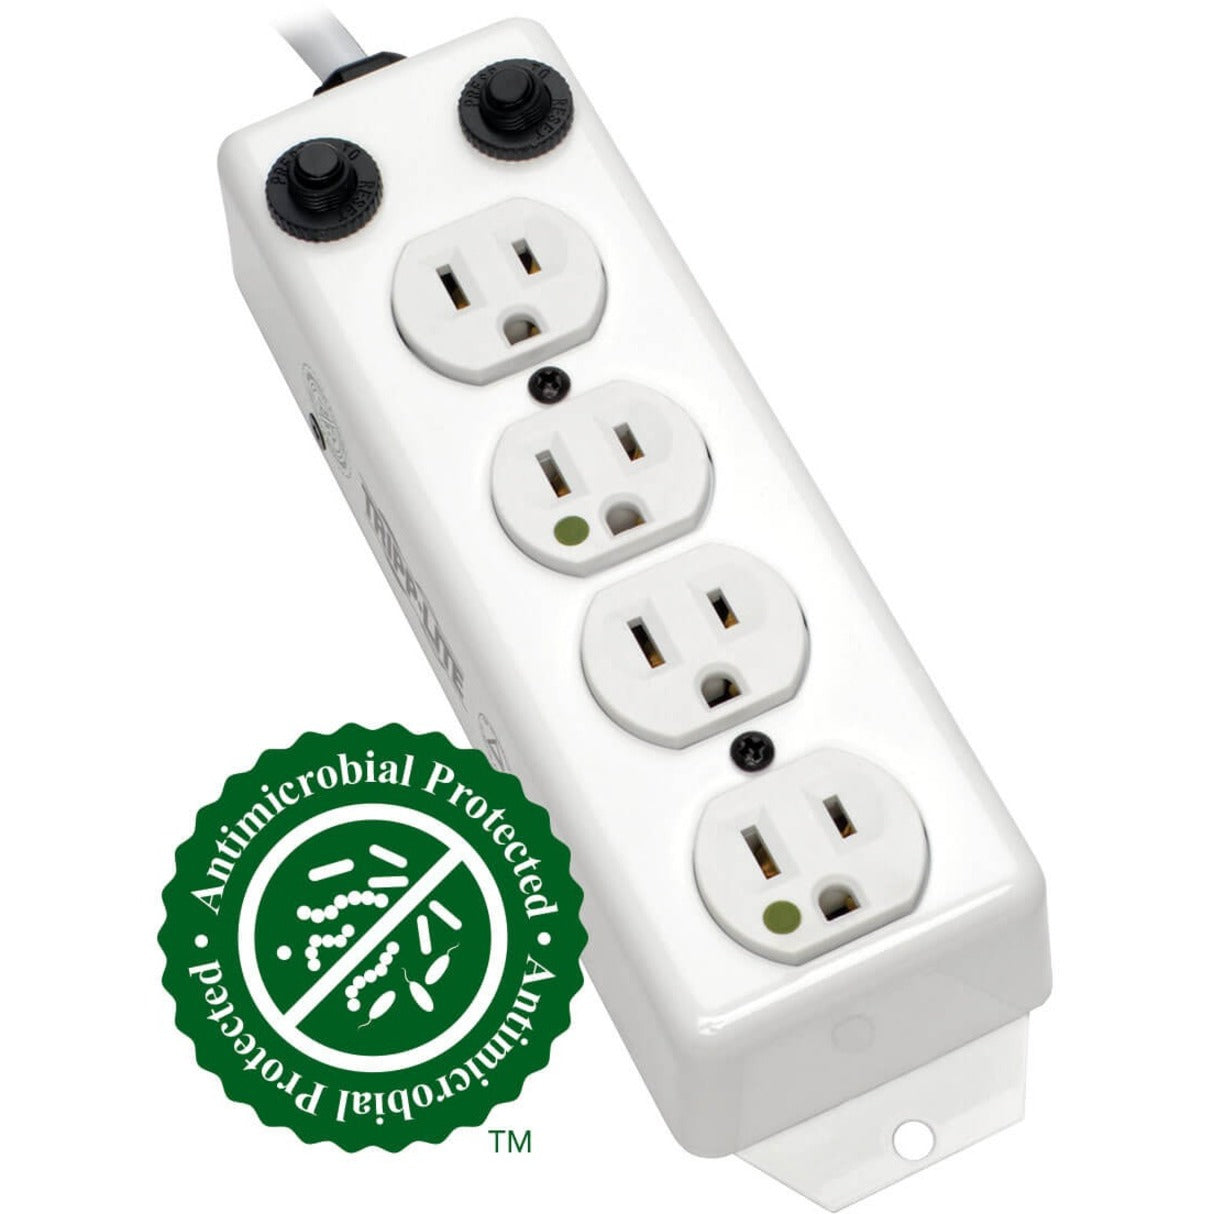 Tripp Lite PS-402-HG-OEM Power Strip for Patient-Care Areas, 4-outlet Medical-Grade with 2-ft. Cord